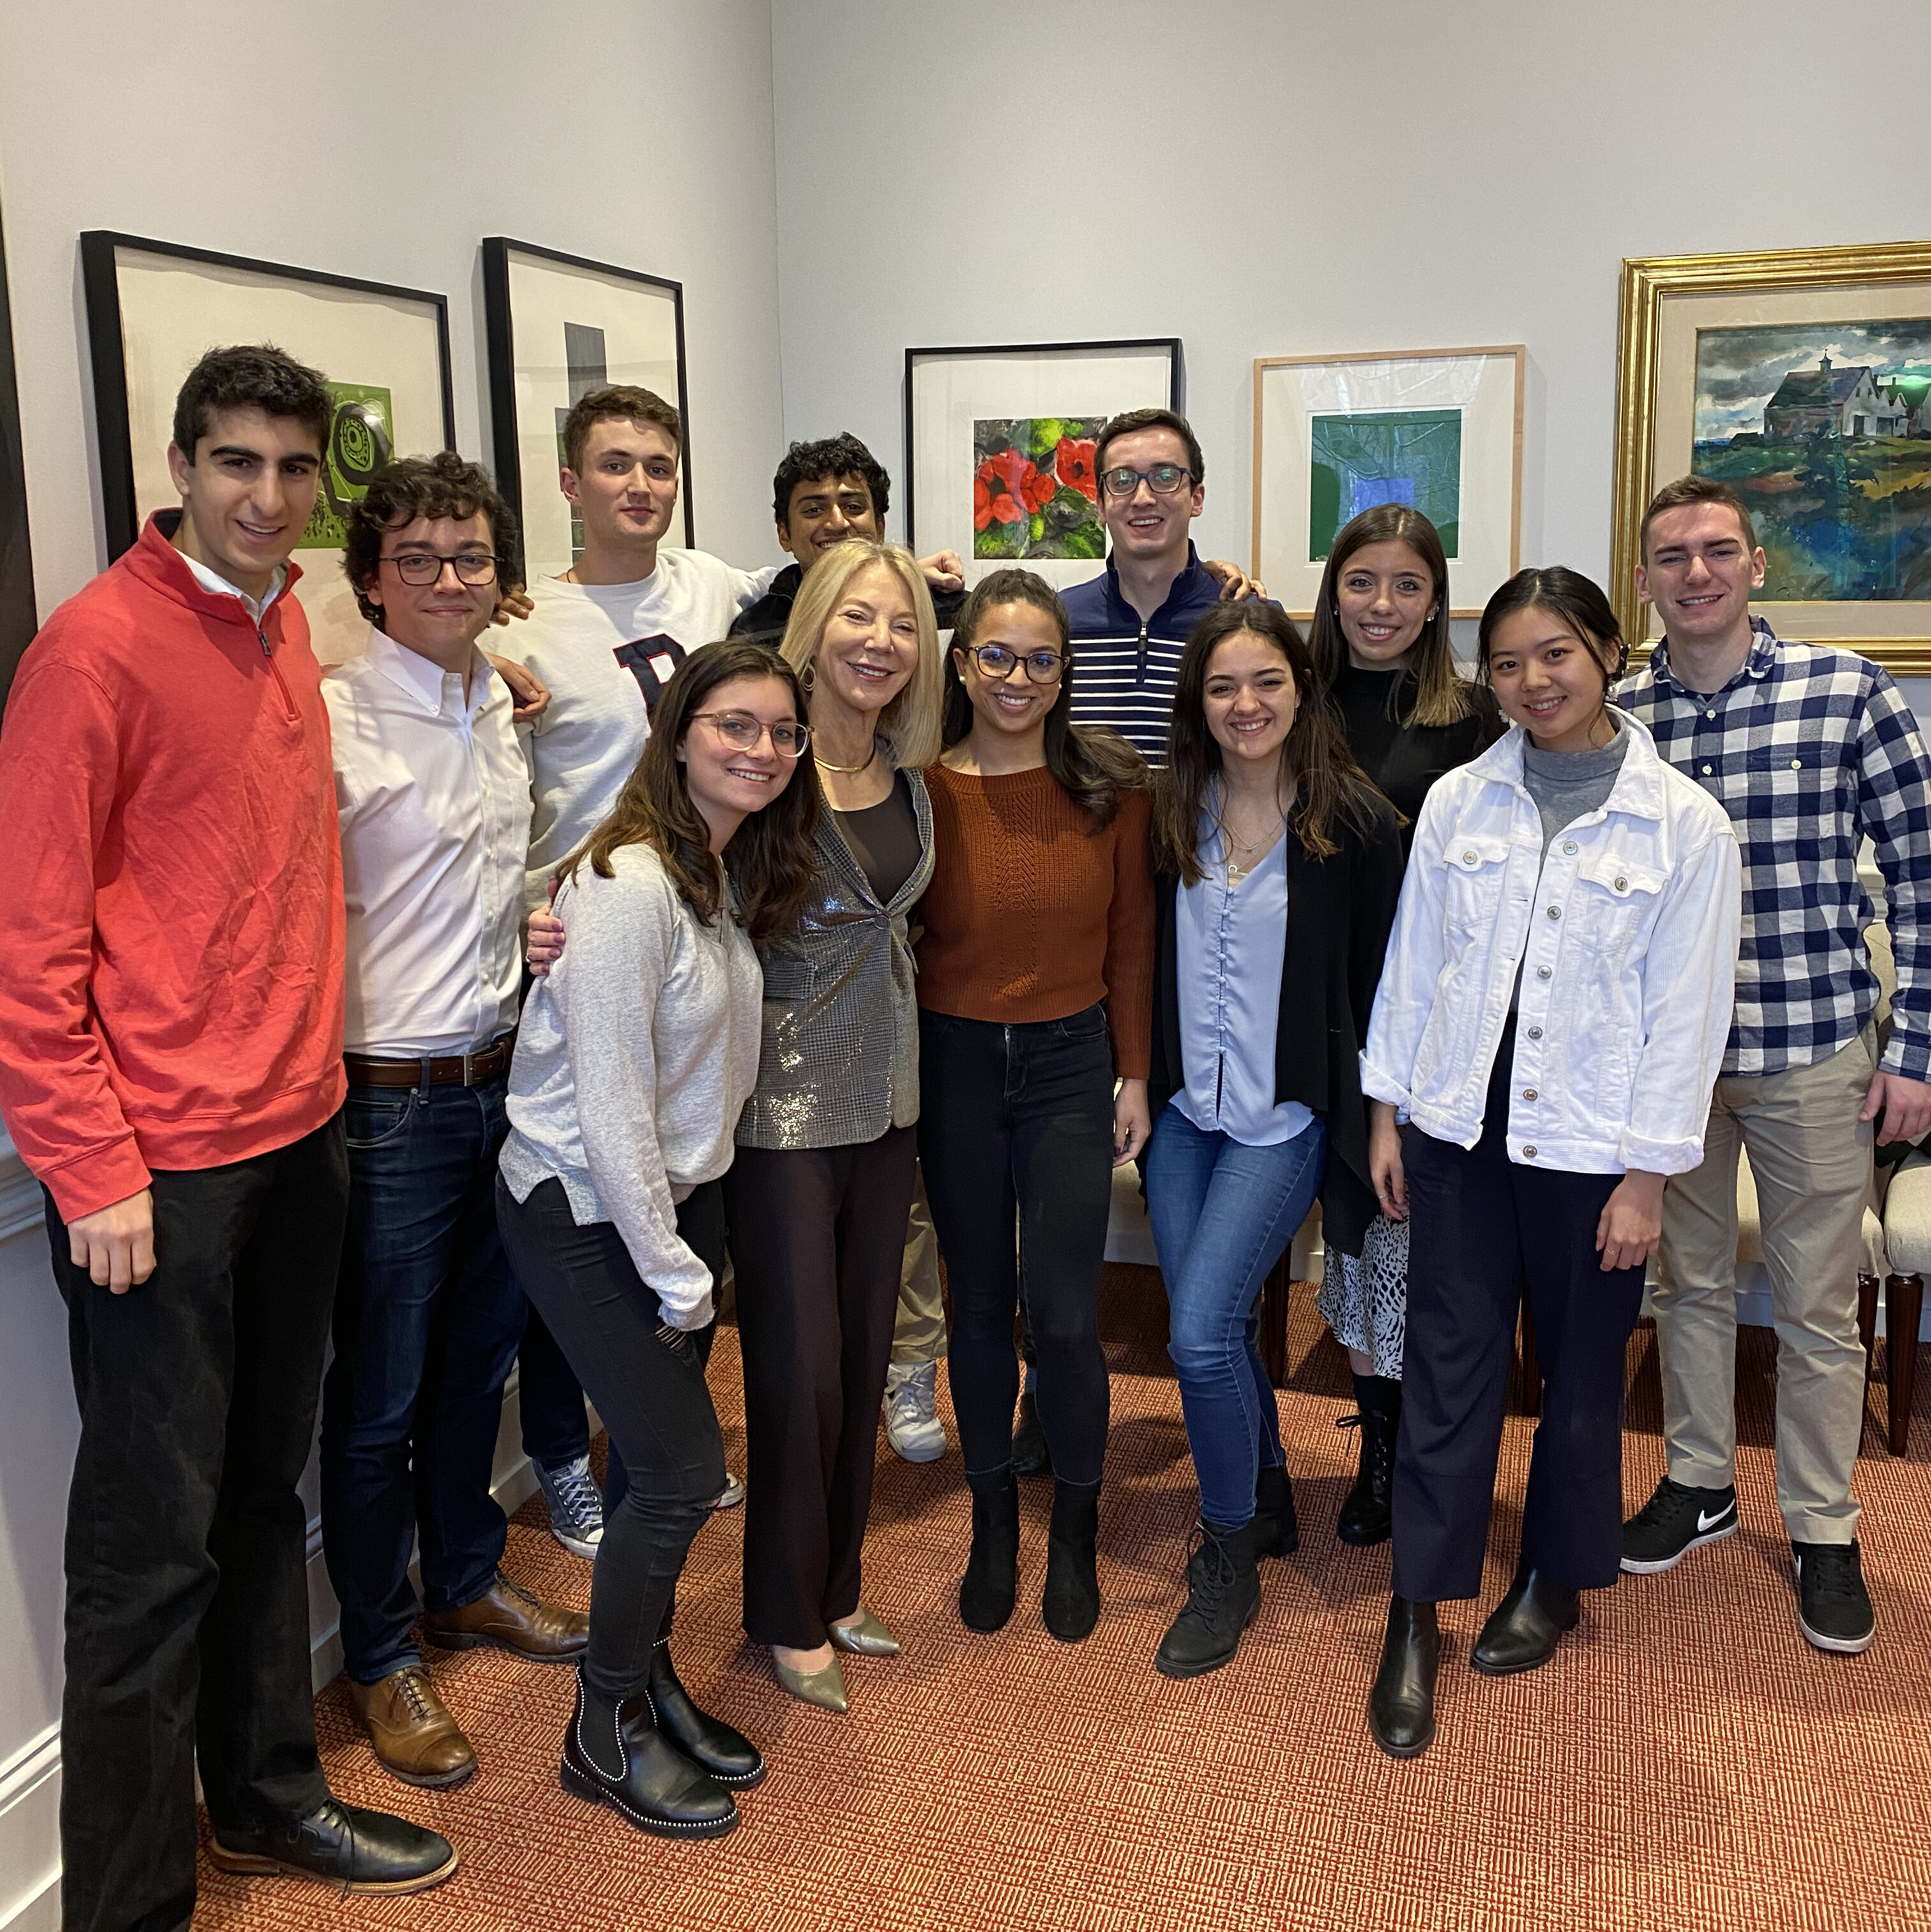 Amy Gutmann, Penn President, 2019 Lunch with Students